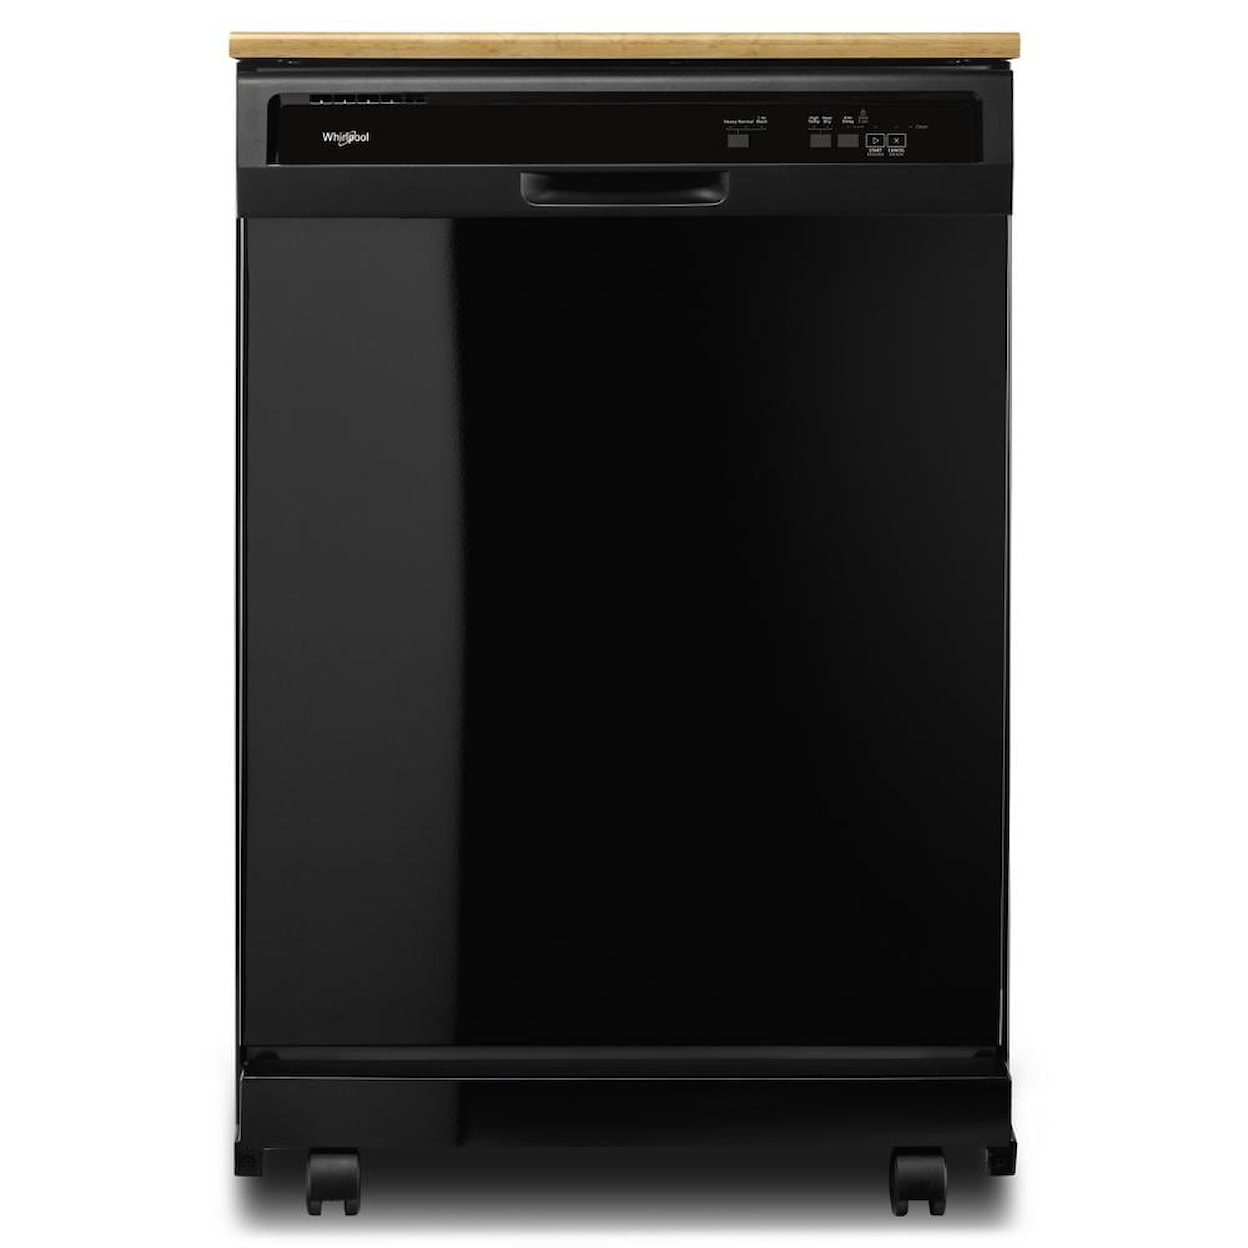 Whirlpool Dishwashers Dining Tables